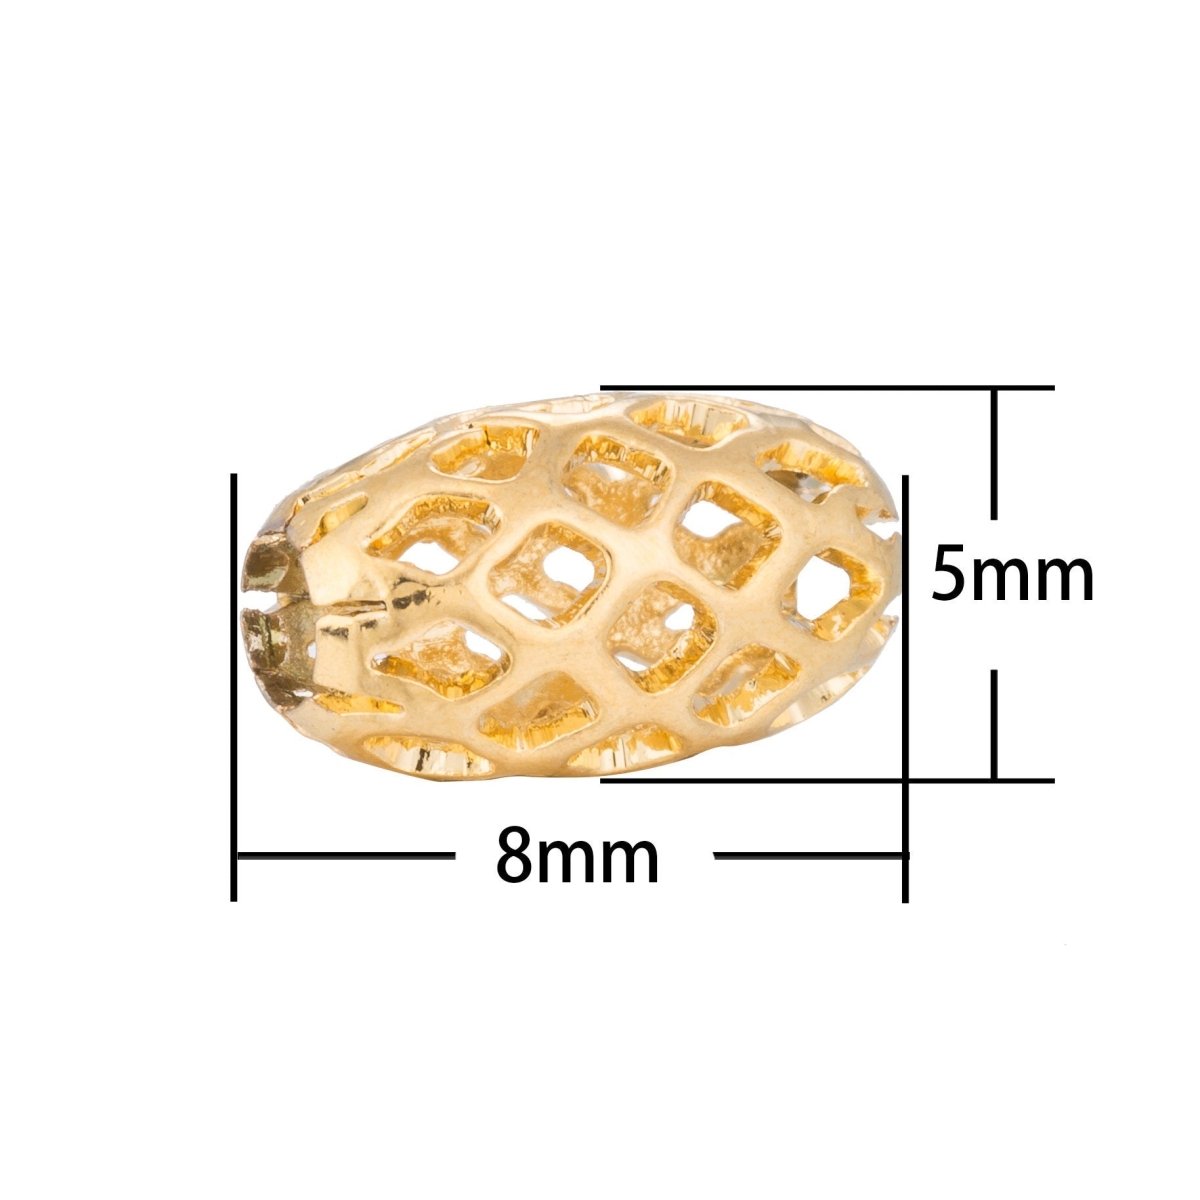 1pc Gold Filled Spacer, Drum Shaped, Barrel, Pineapple, Bead Making, Ladies, Women, Bracelet Charm Bead Finding Connector For Jewelry Making, 032118-1746 - DLUXCA